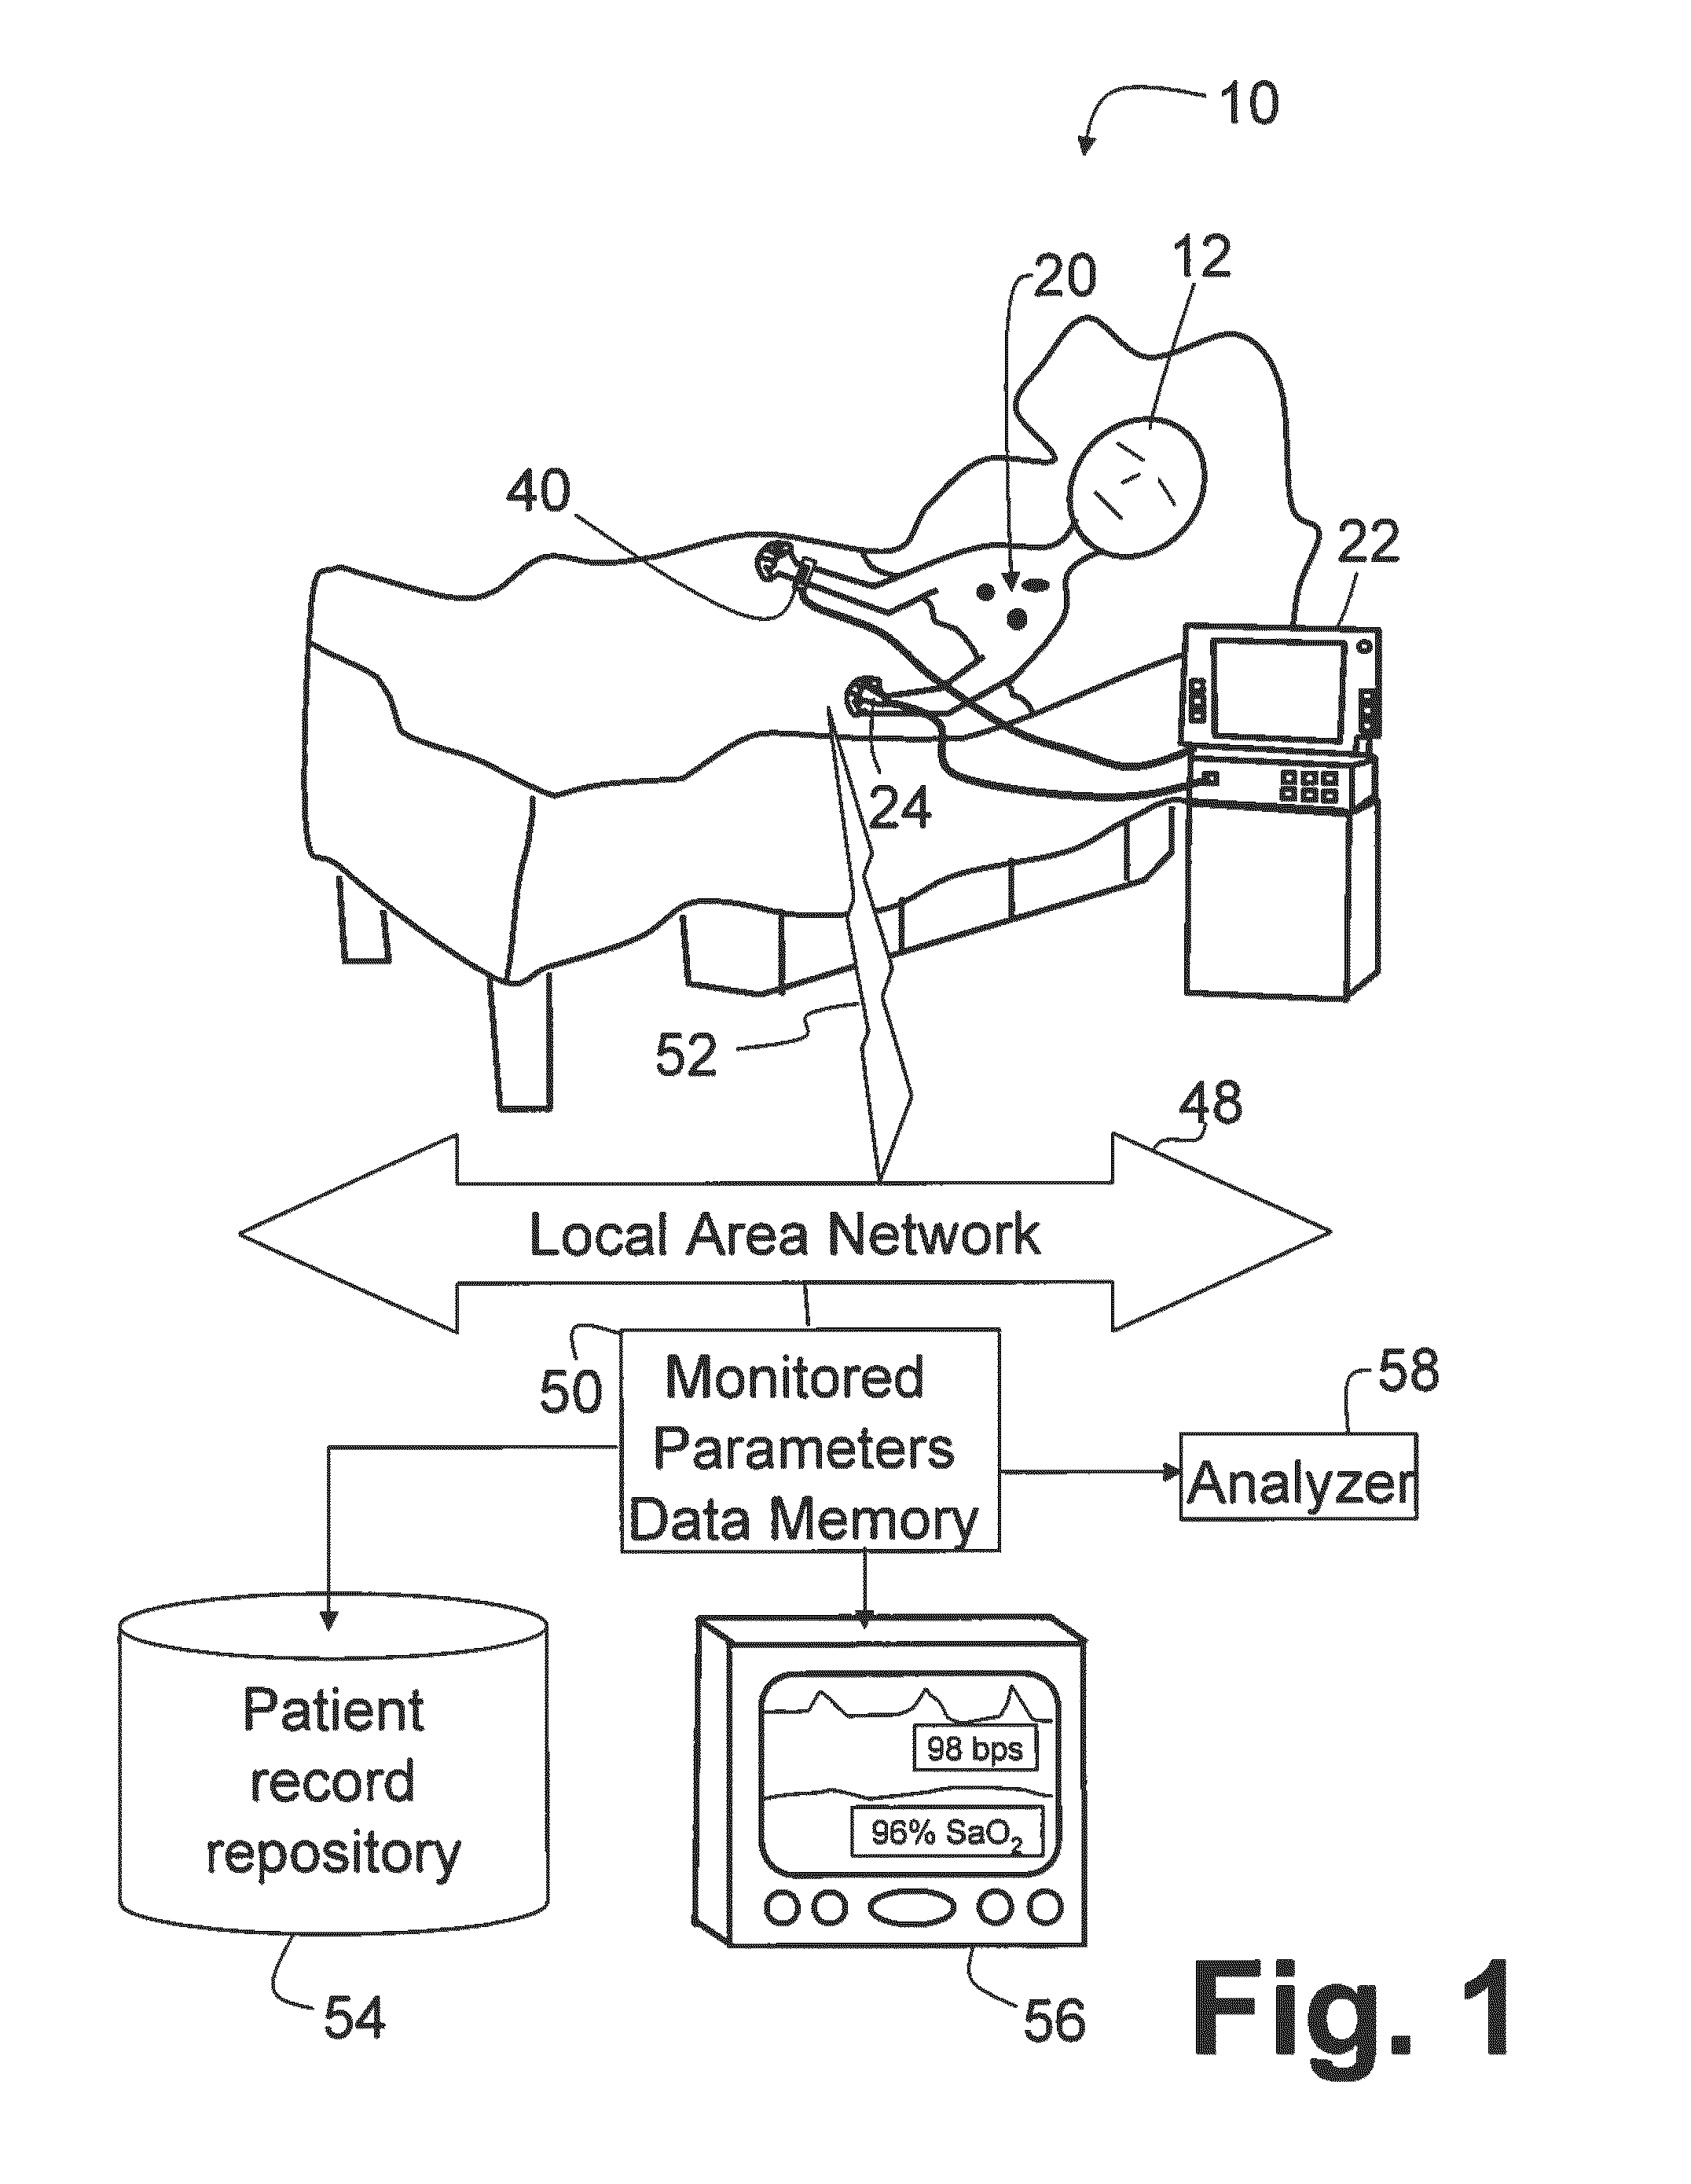 Apparatus to measure the instantaneous patients' acuity value